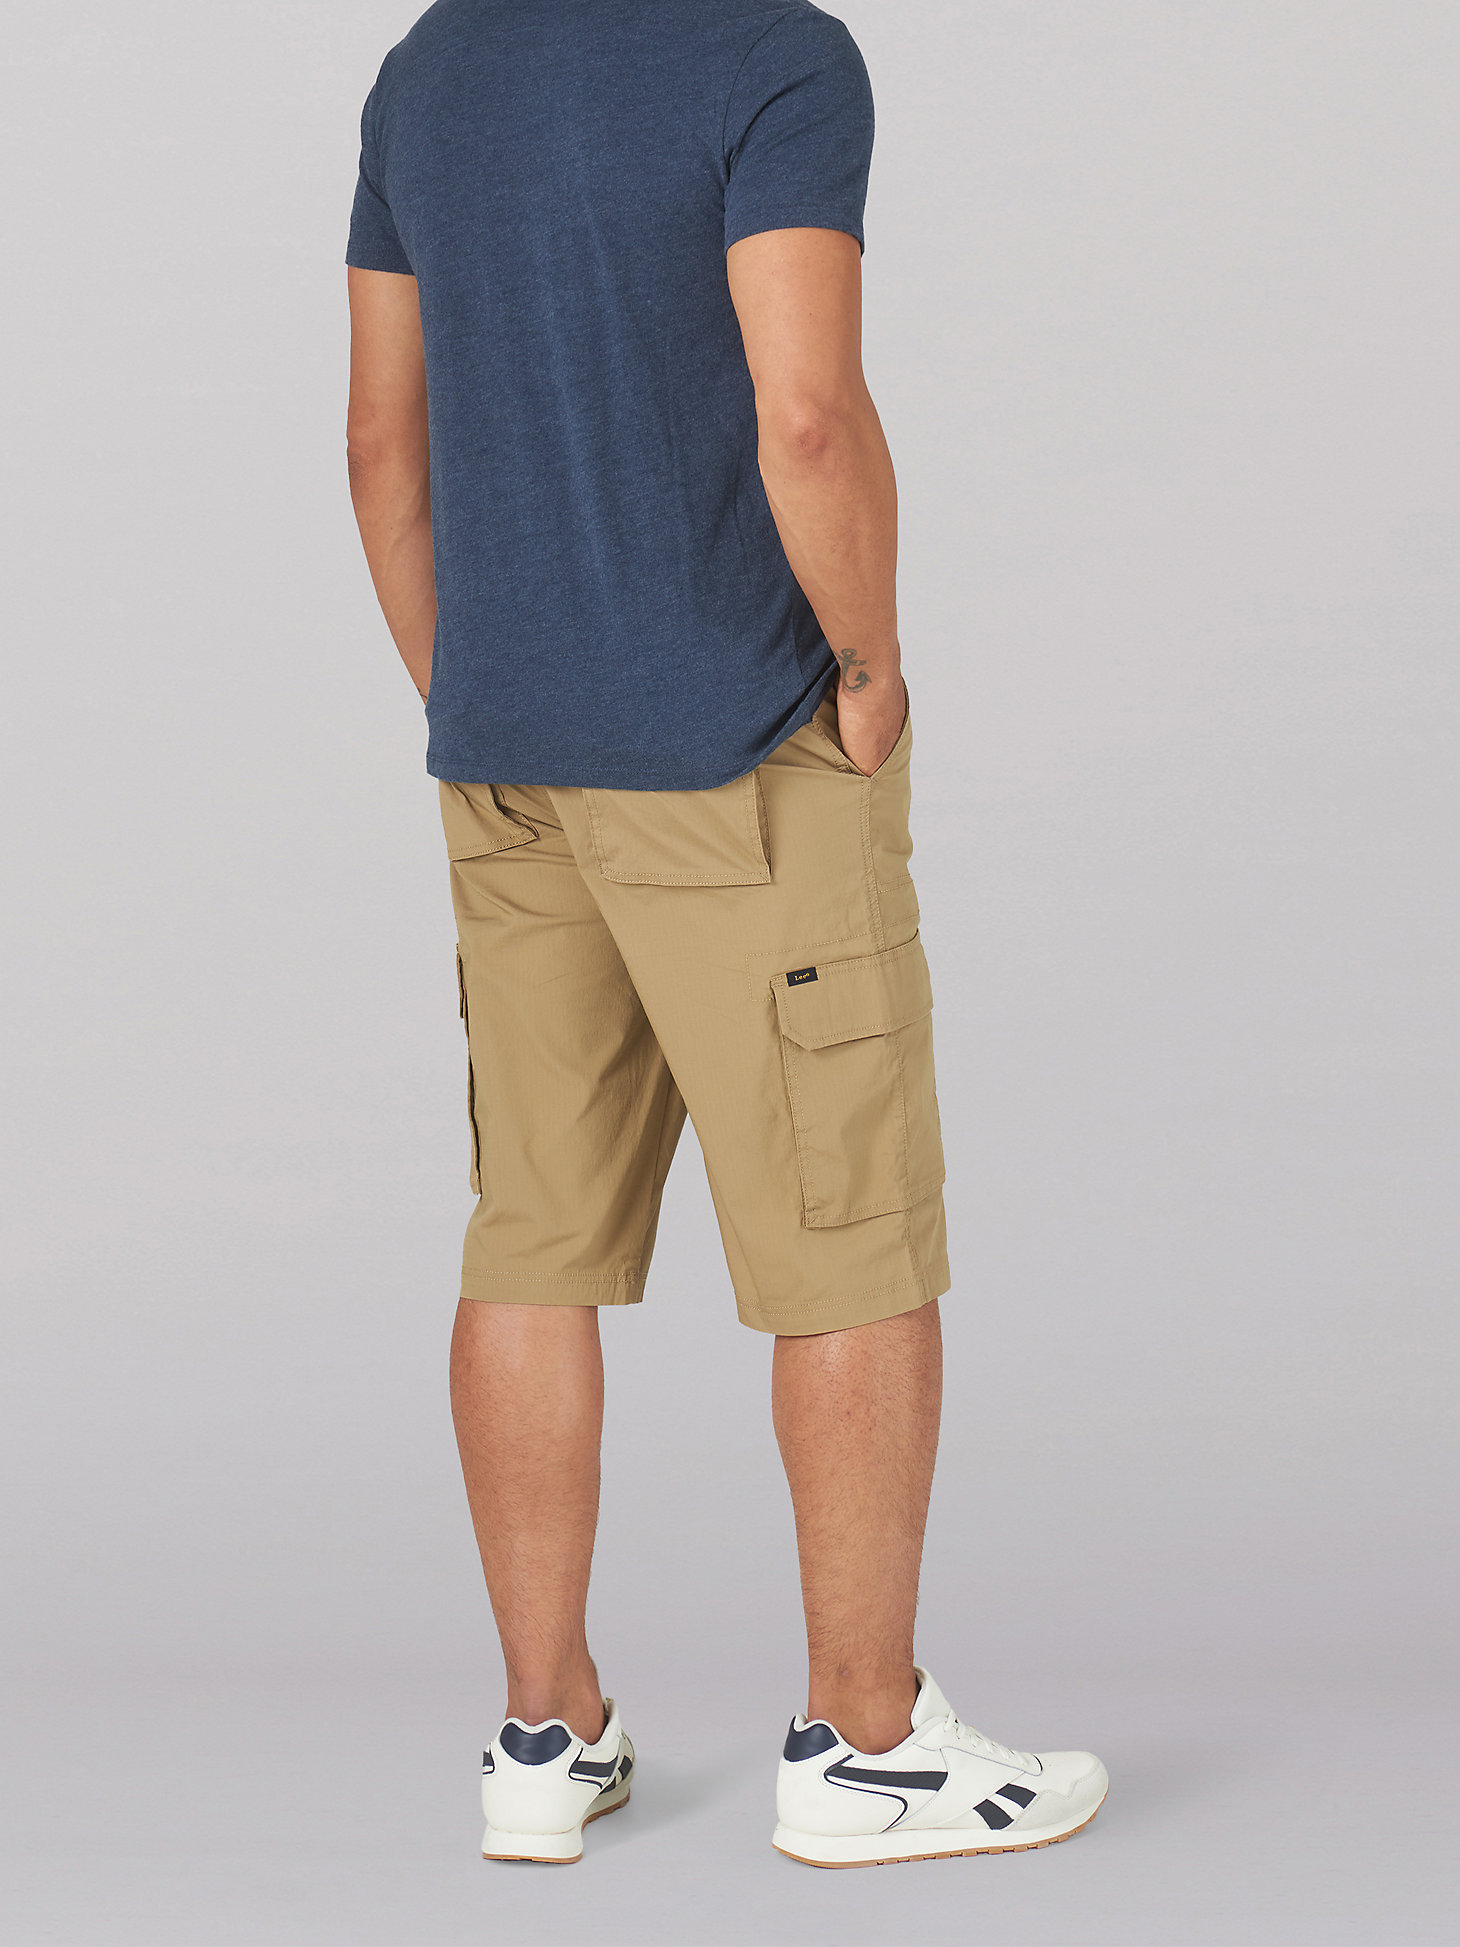 Men's Extreme Motion Cameron Relaxed Fit Cargo Short in KC Khaki alternative view 1